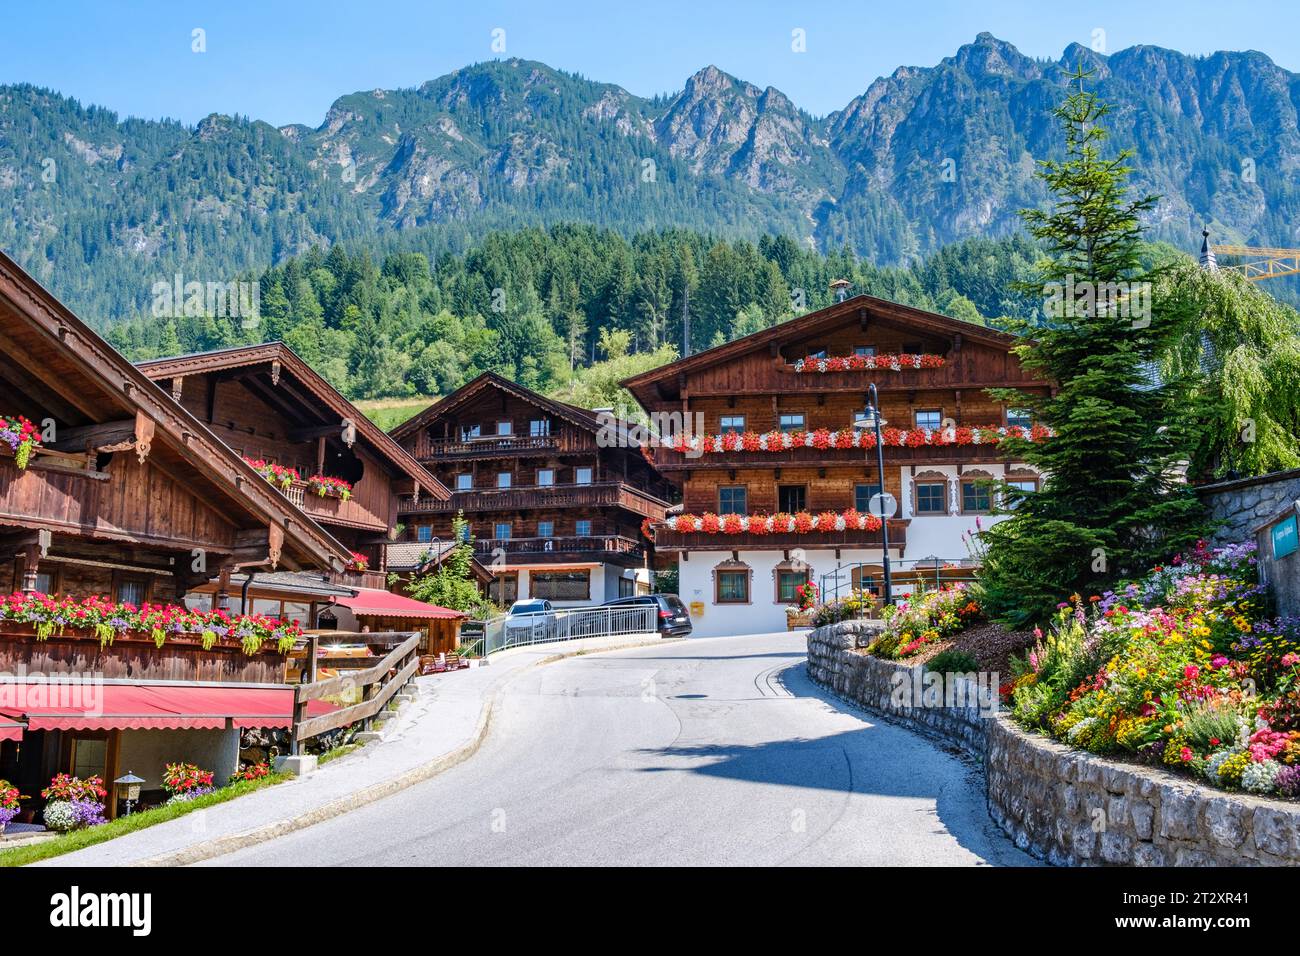 Alpbach Village, traditional wooden Alpine architecture, flowers on balconies, meadows, tall trees. Tyrol, Austria. Stock Photo